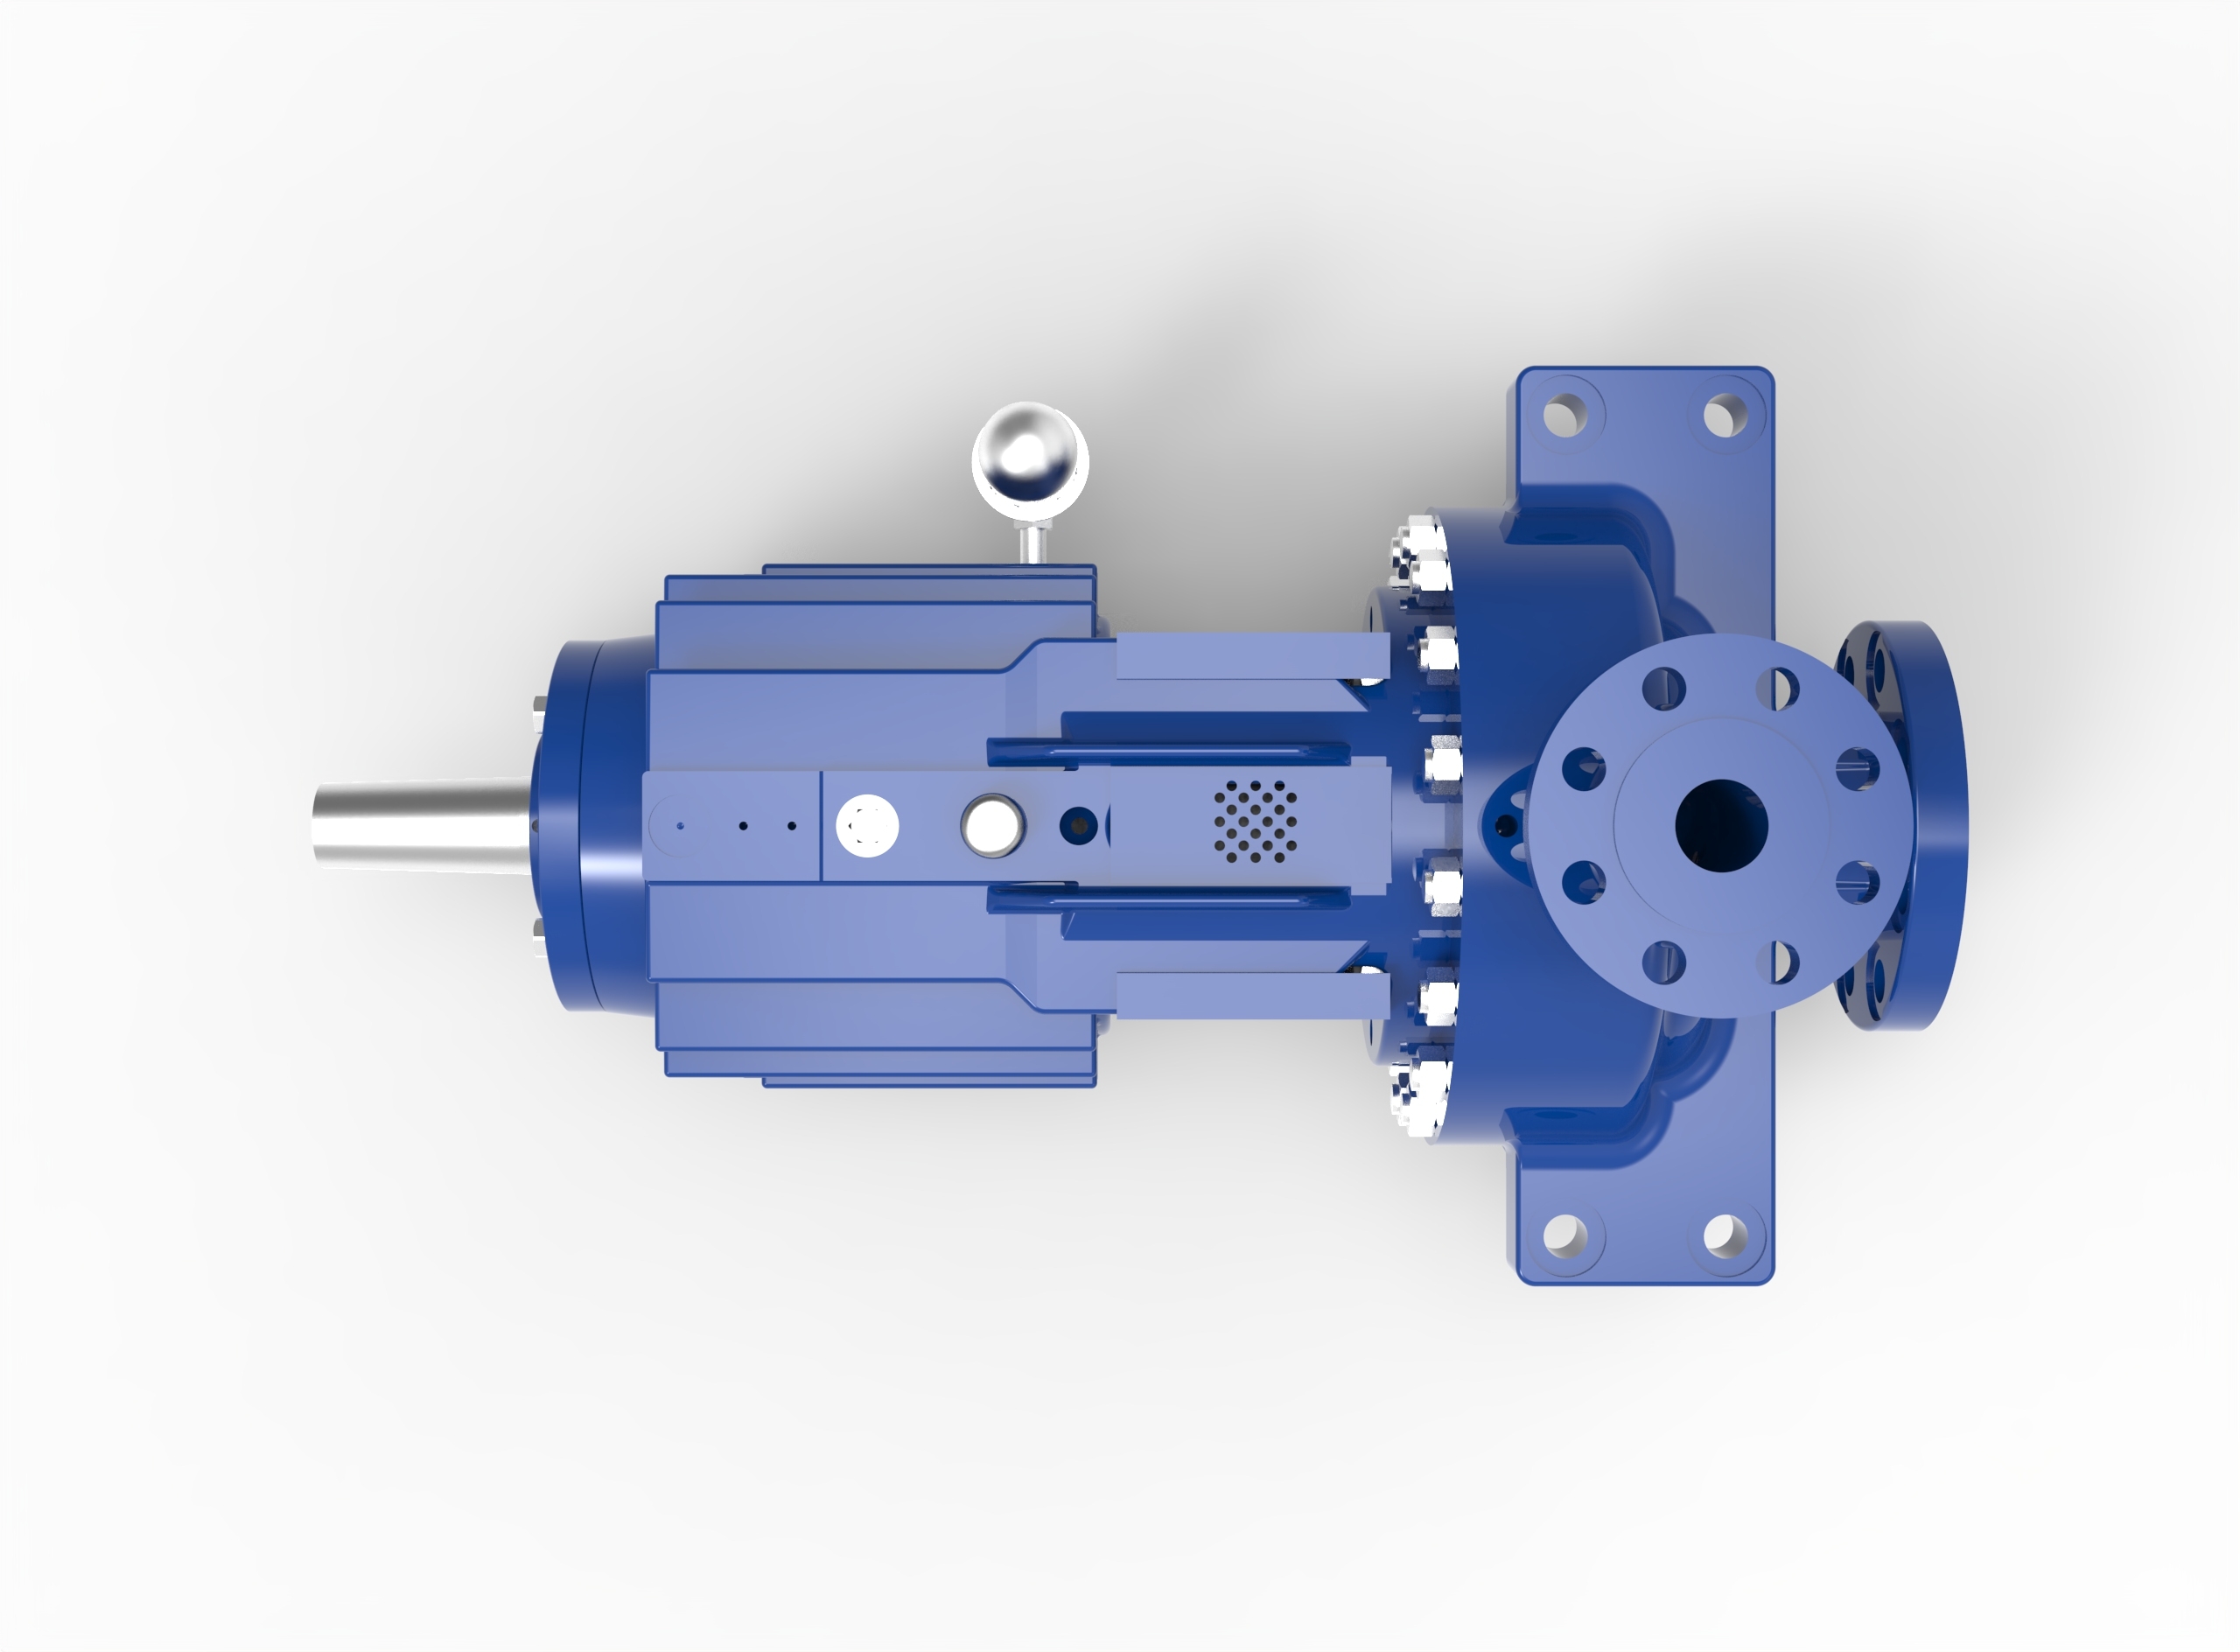 Top view of a Termomeccanica Pompe AP OH2 610 Centrifugal Pump manufactured by Trillium Flow Technologies